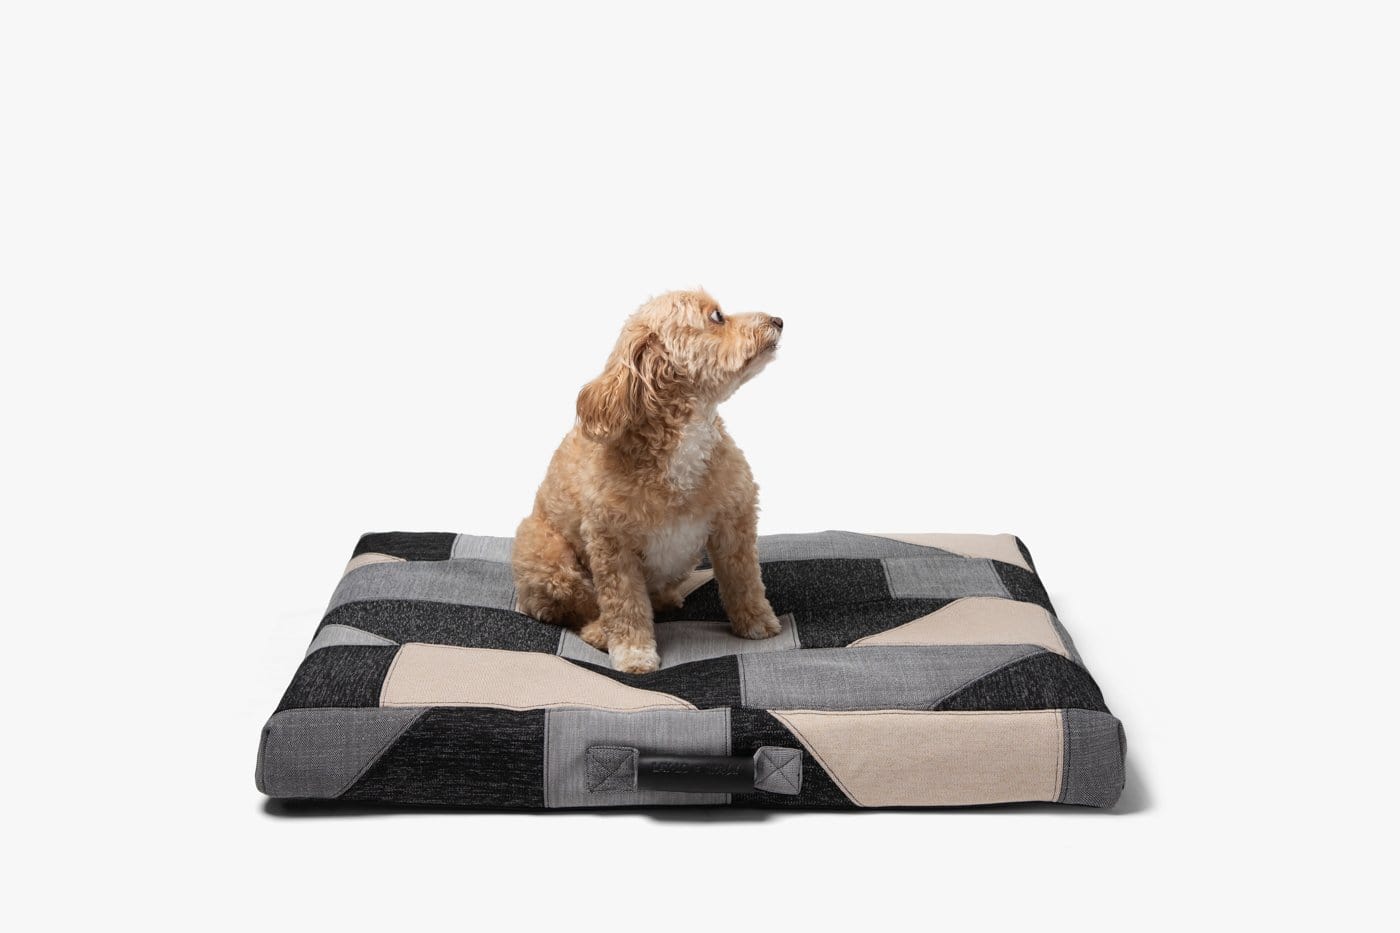 Louis Vuitton dog bed cute  Cute dog clothes, Pet bed, Puppy beds